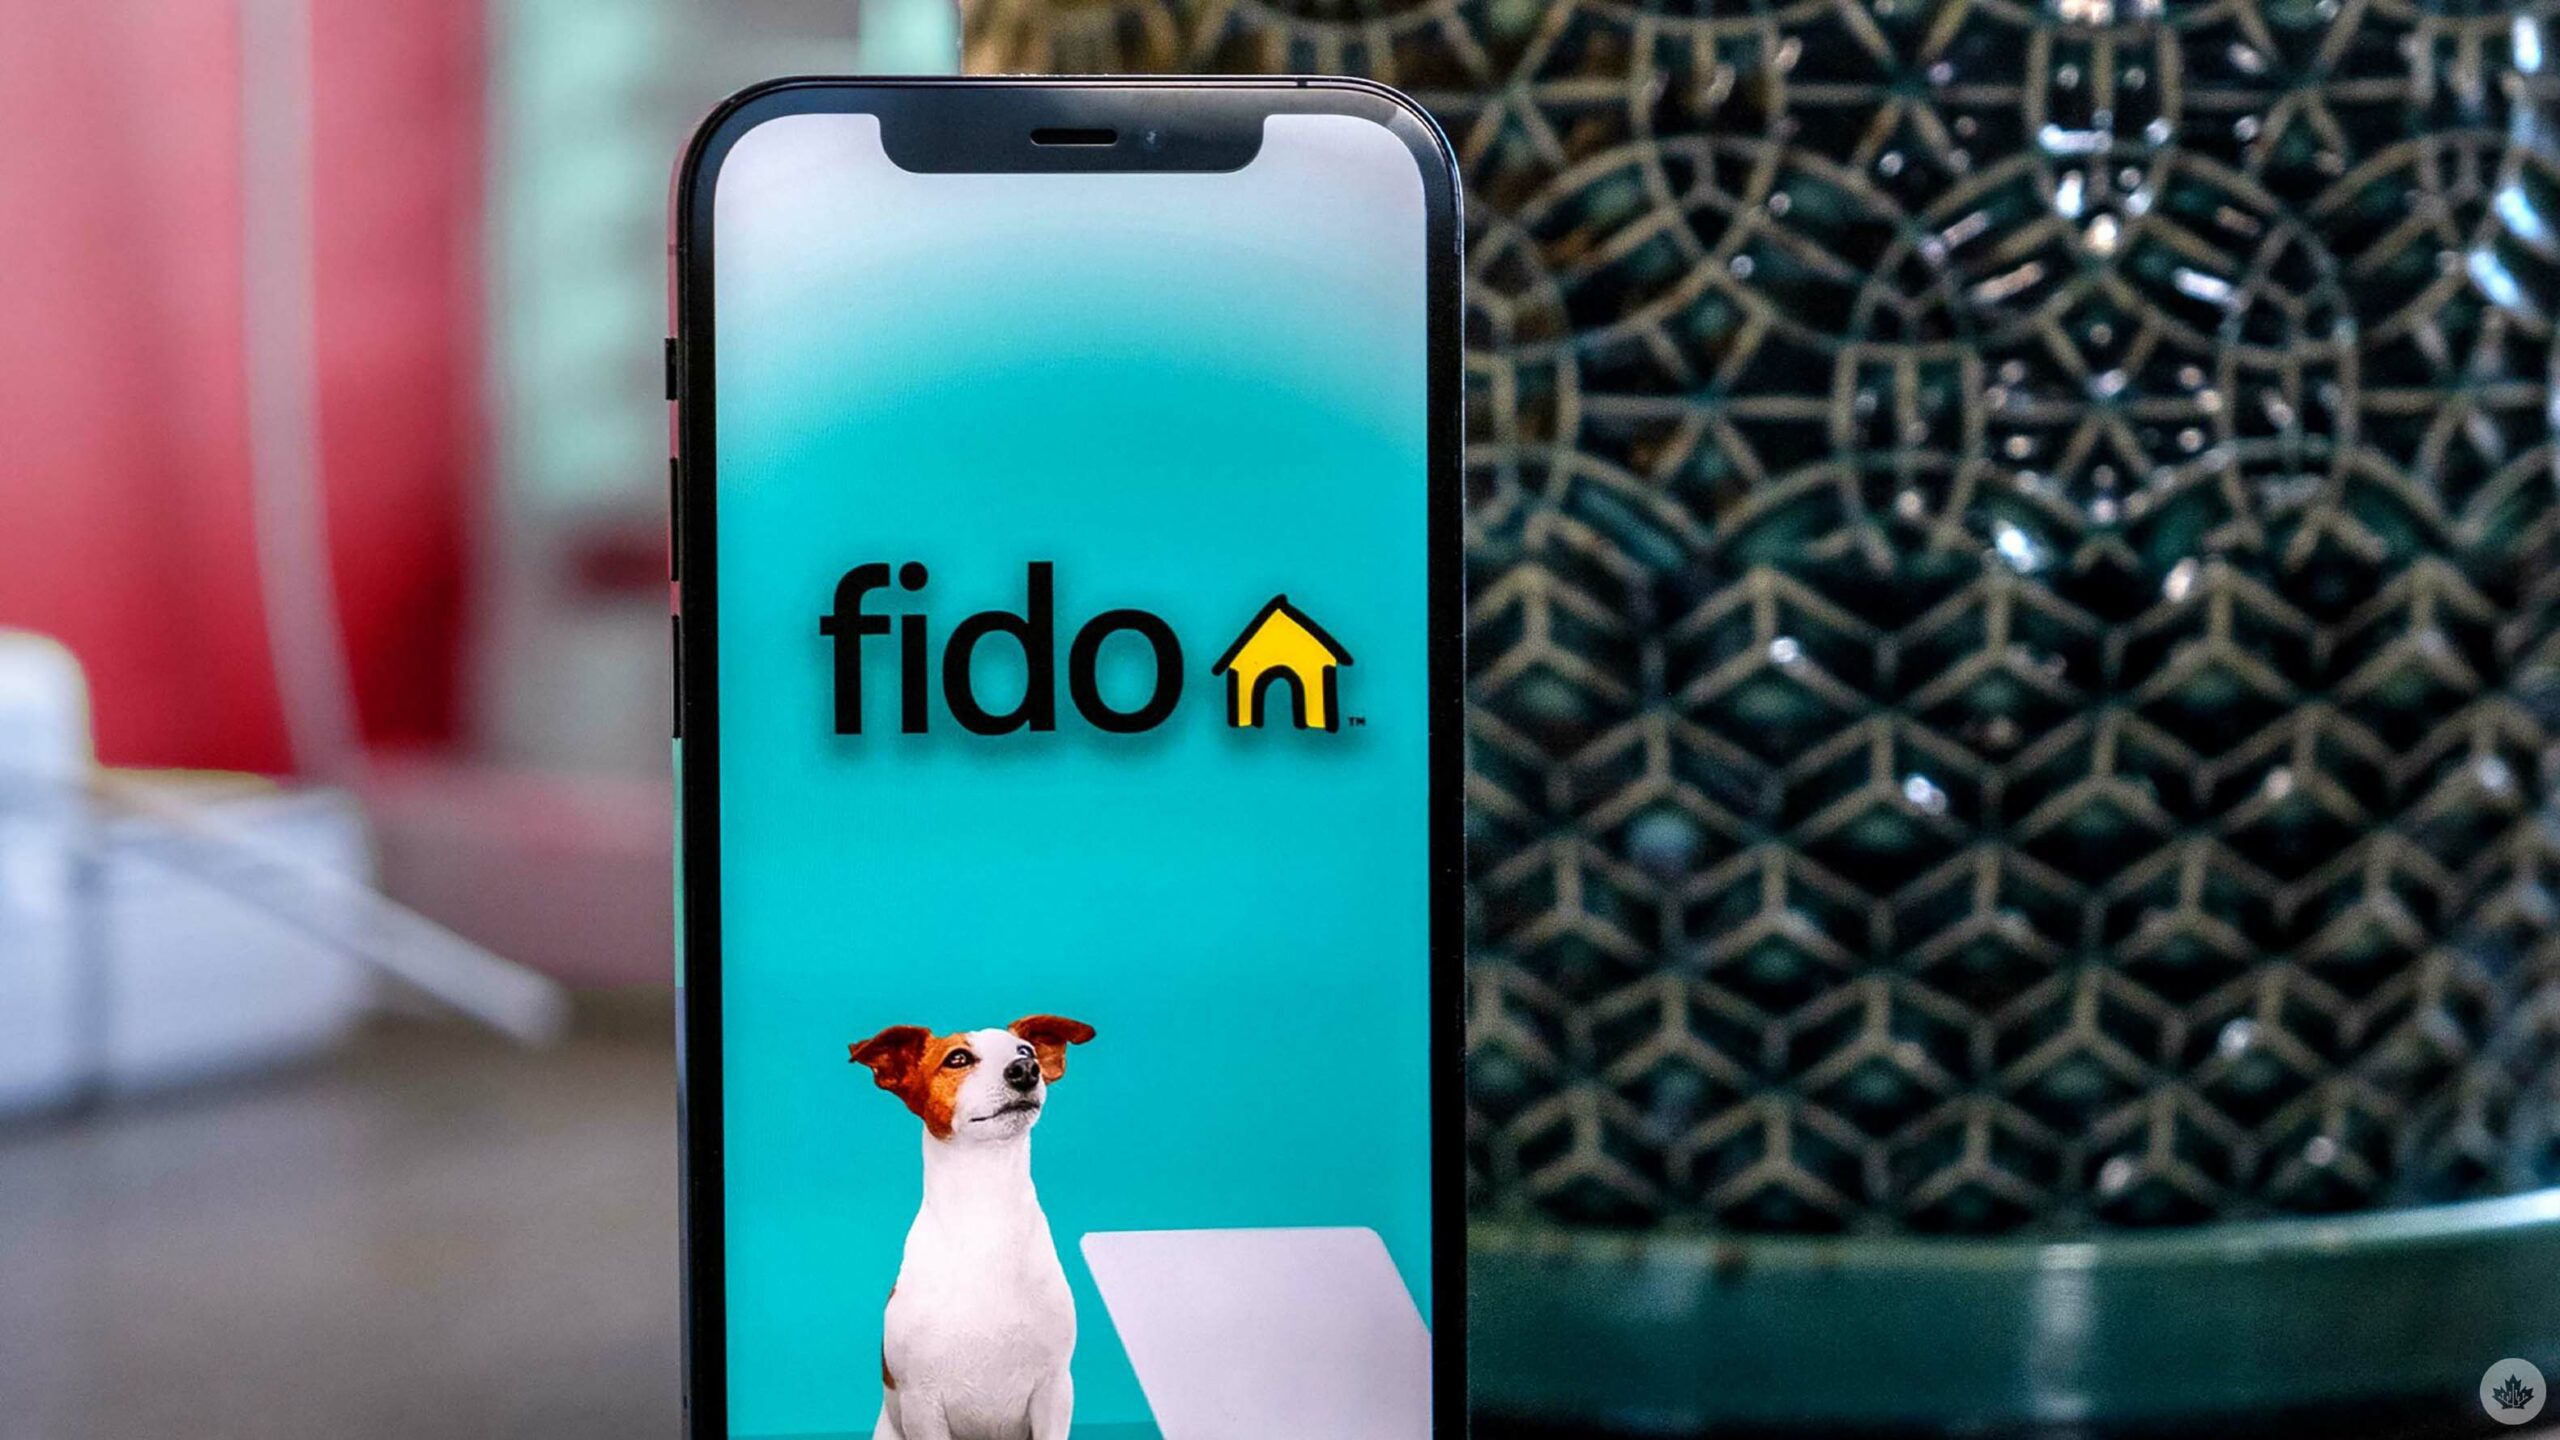 Fido increases $34/20GB 4G plan to $39/month